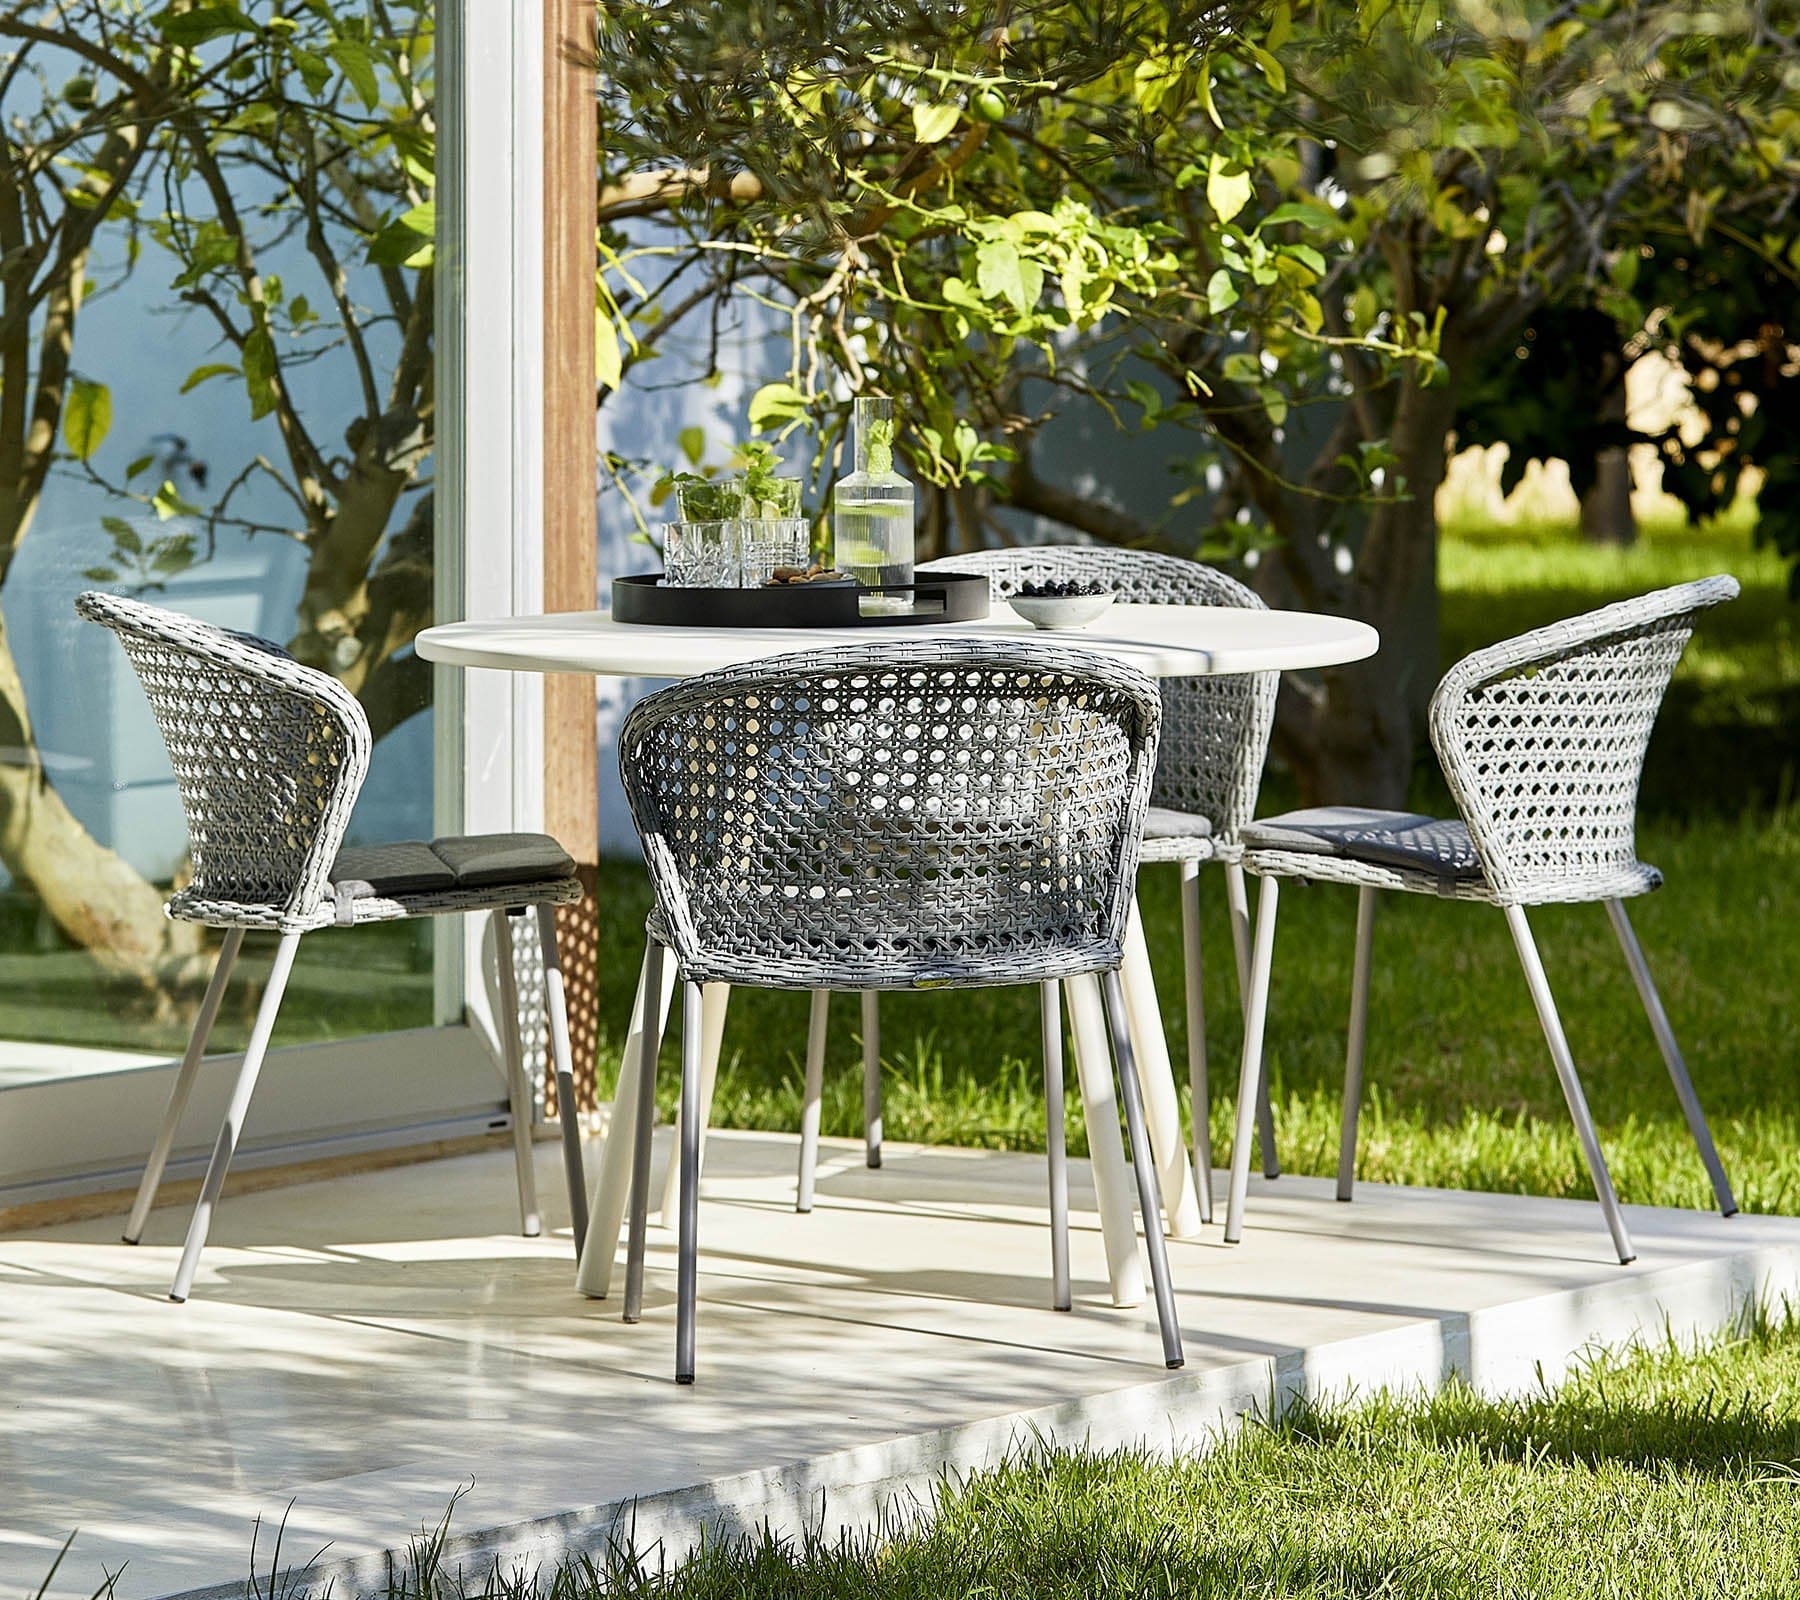 Boxhill's Lean Stackable Outdoor Garden Chair French Weave lifestyle image at patio with white round table and 2 glasses of water and a bottle container on top